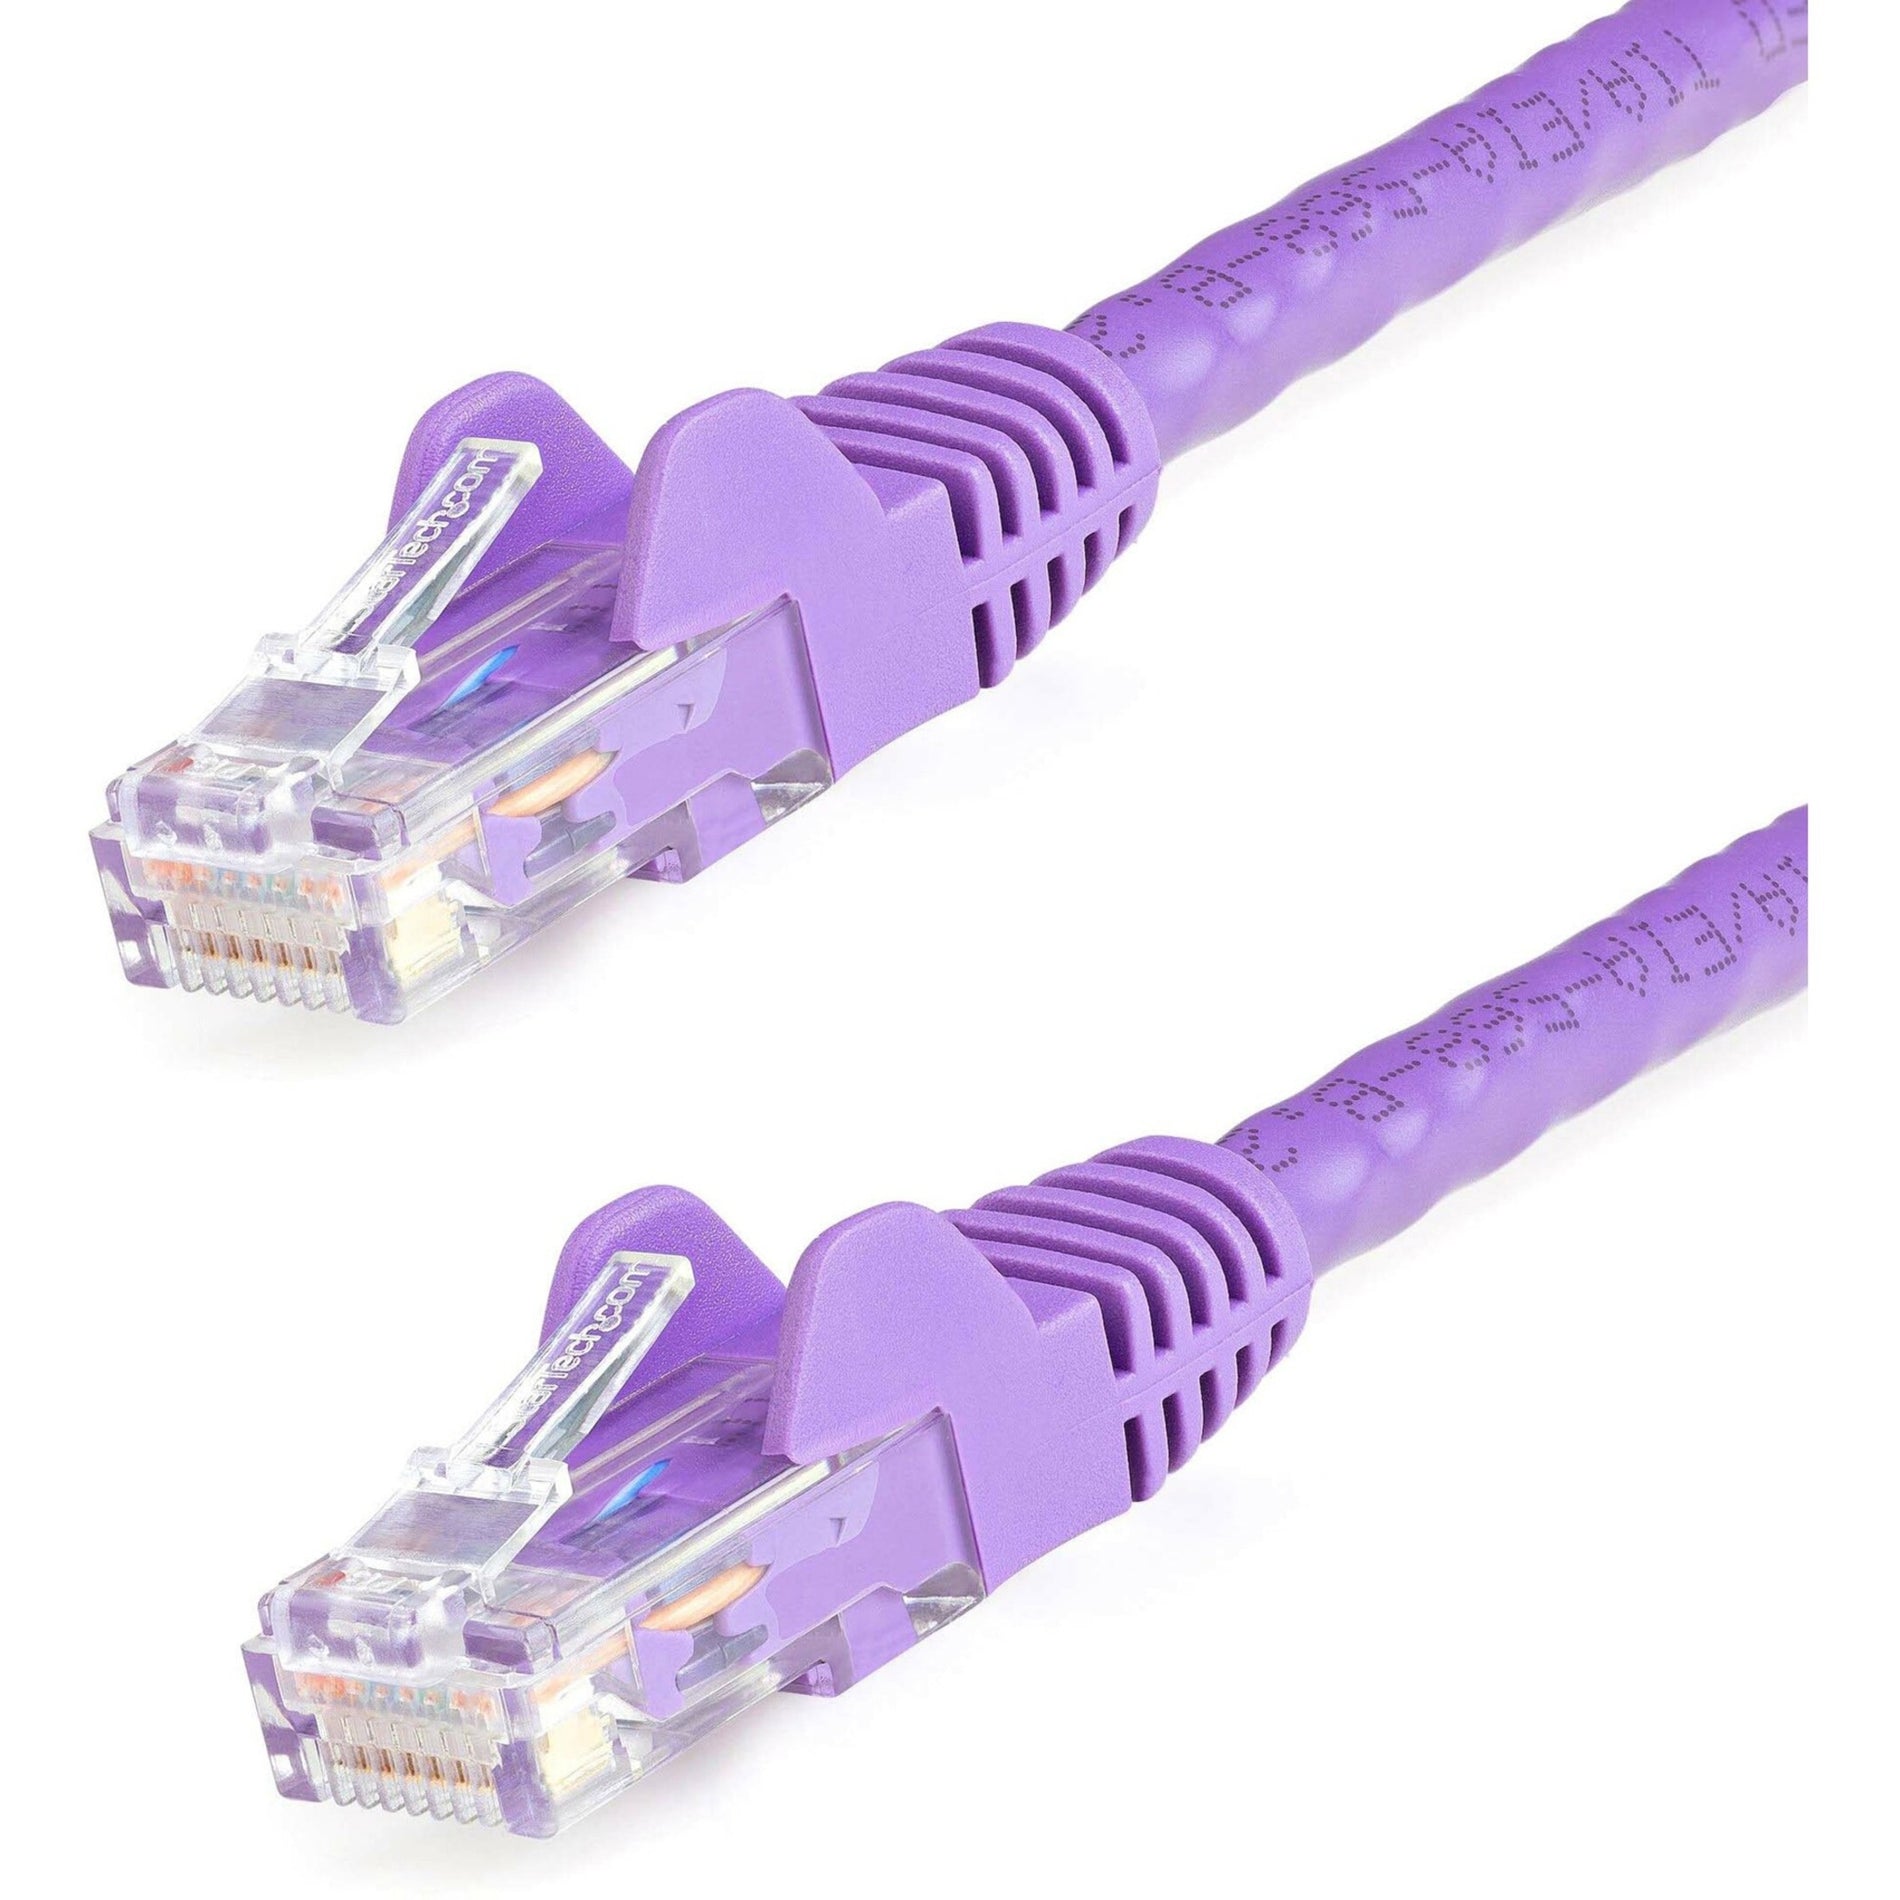 StarTech.com N6PATCH10PL 10 ft Purple Snagless Cat6 UTP Patch Cable, Molded, 10 Gbit/s Data Transfer Rate, Gold Plated Connectors